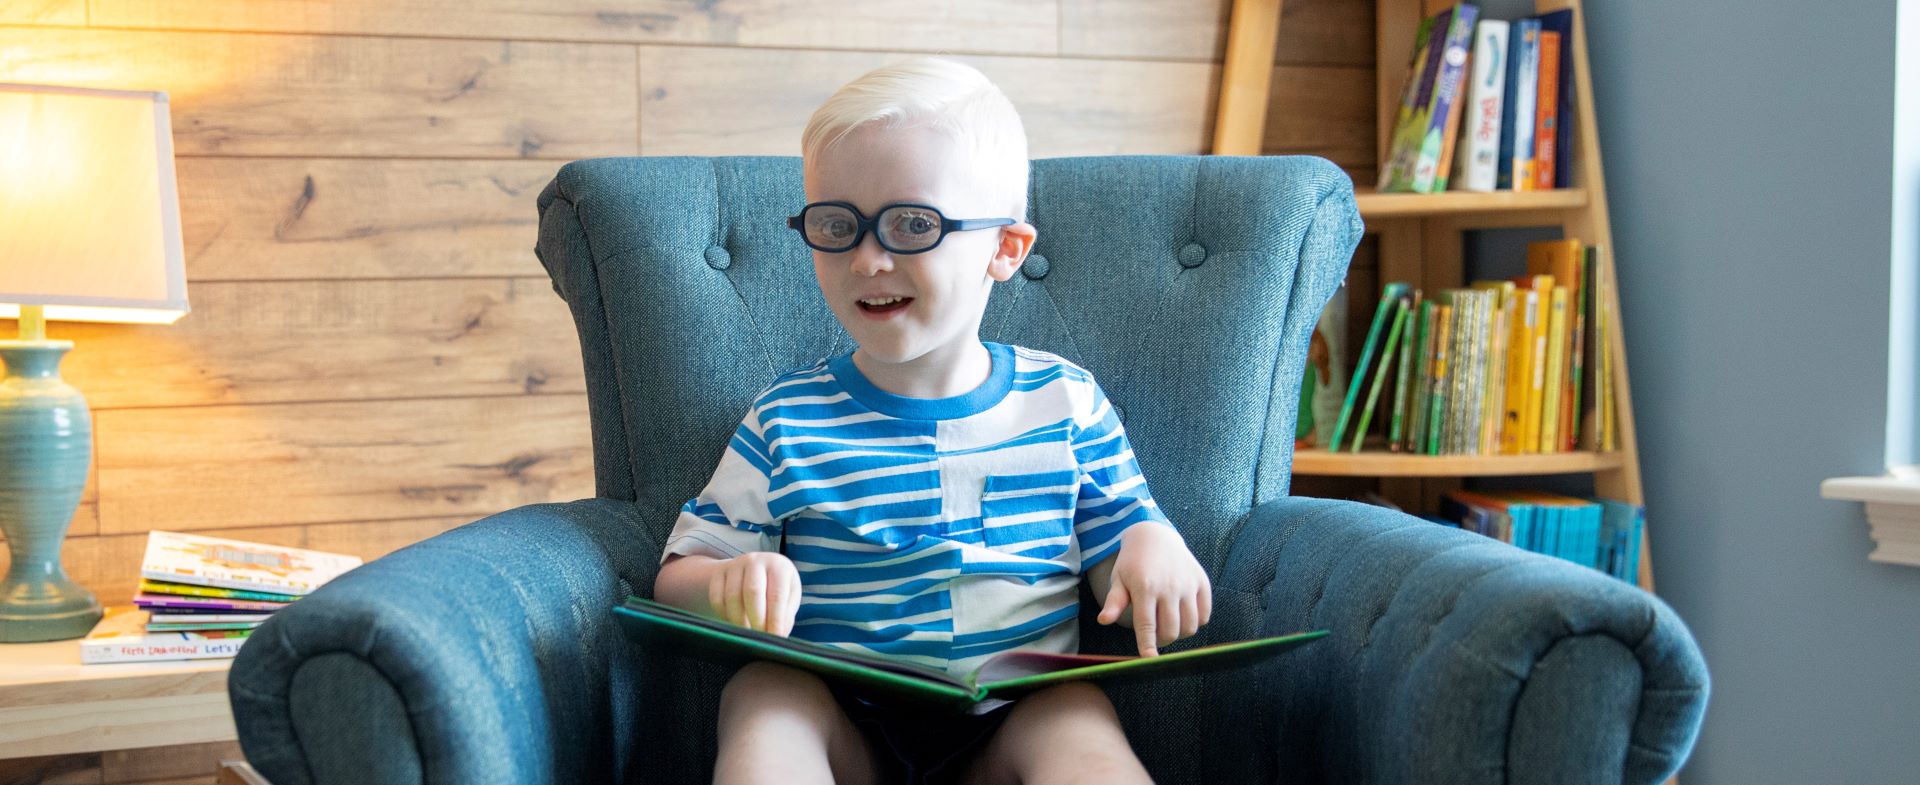 A child wearing glasses sitting in a blue armchair while reading a braille storybook.